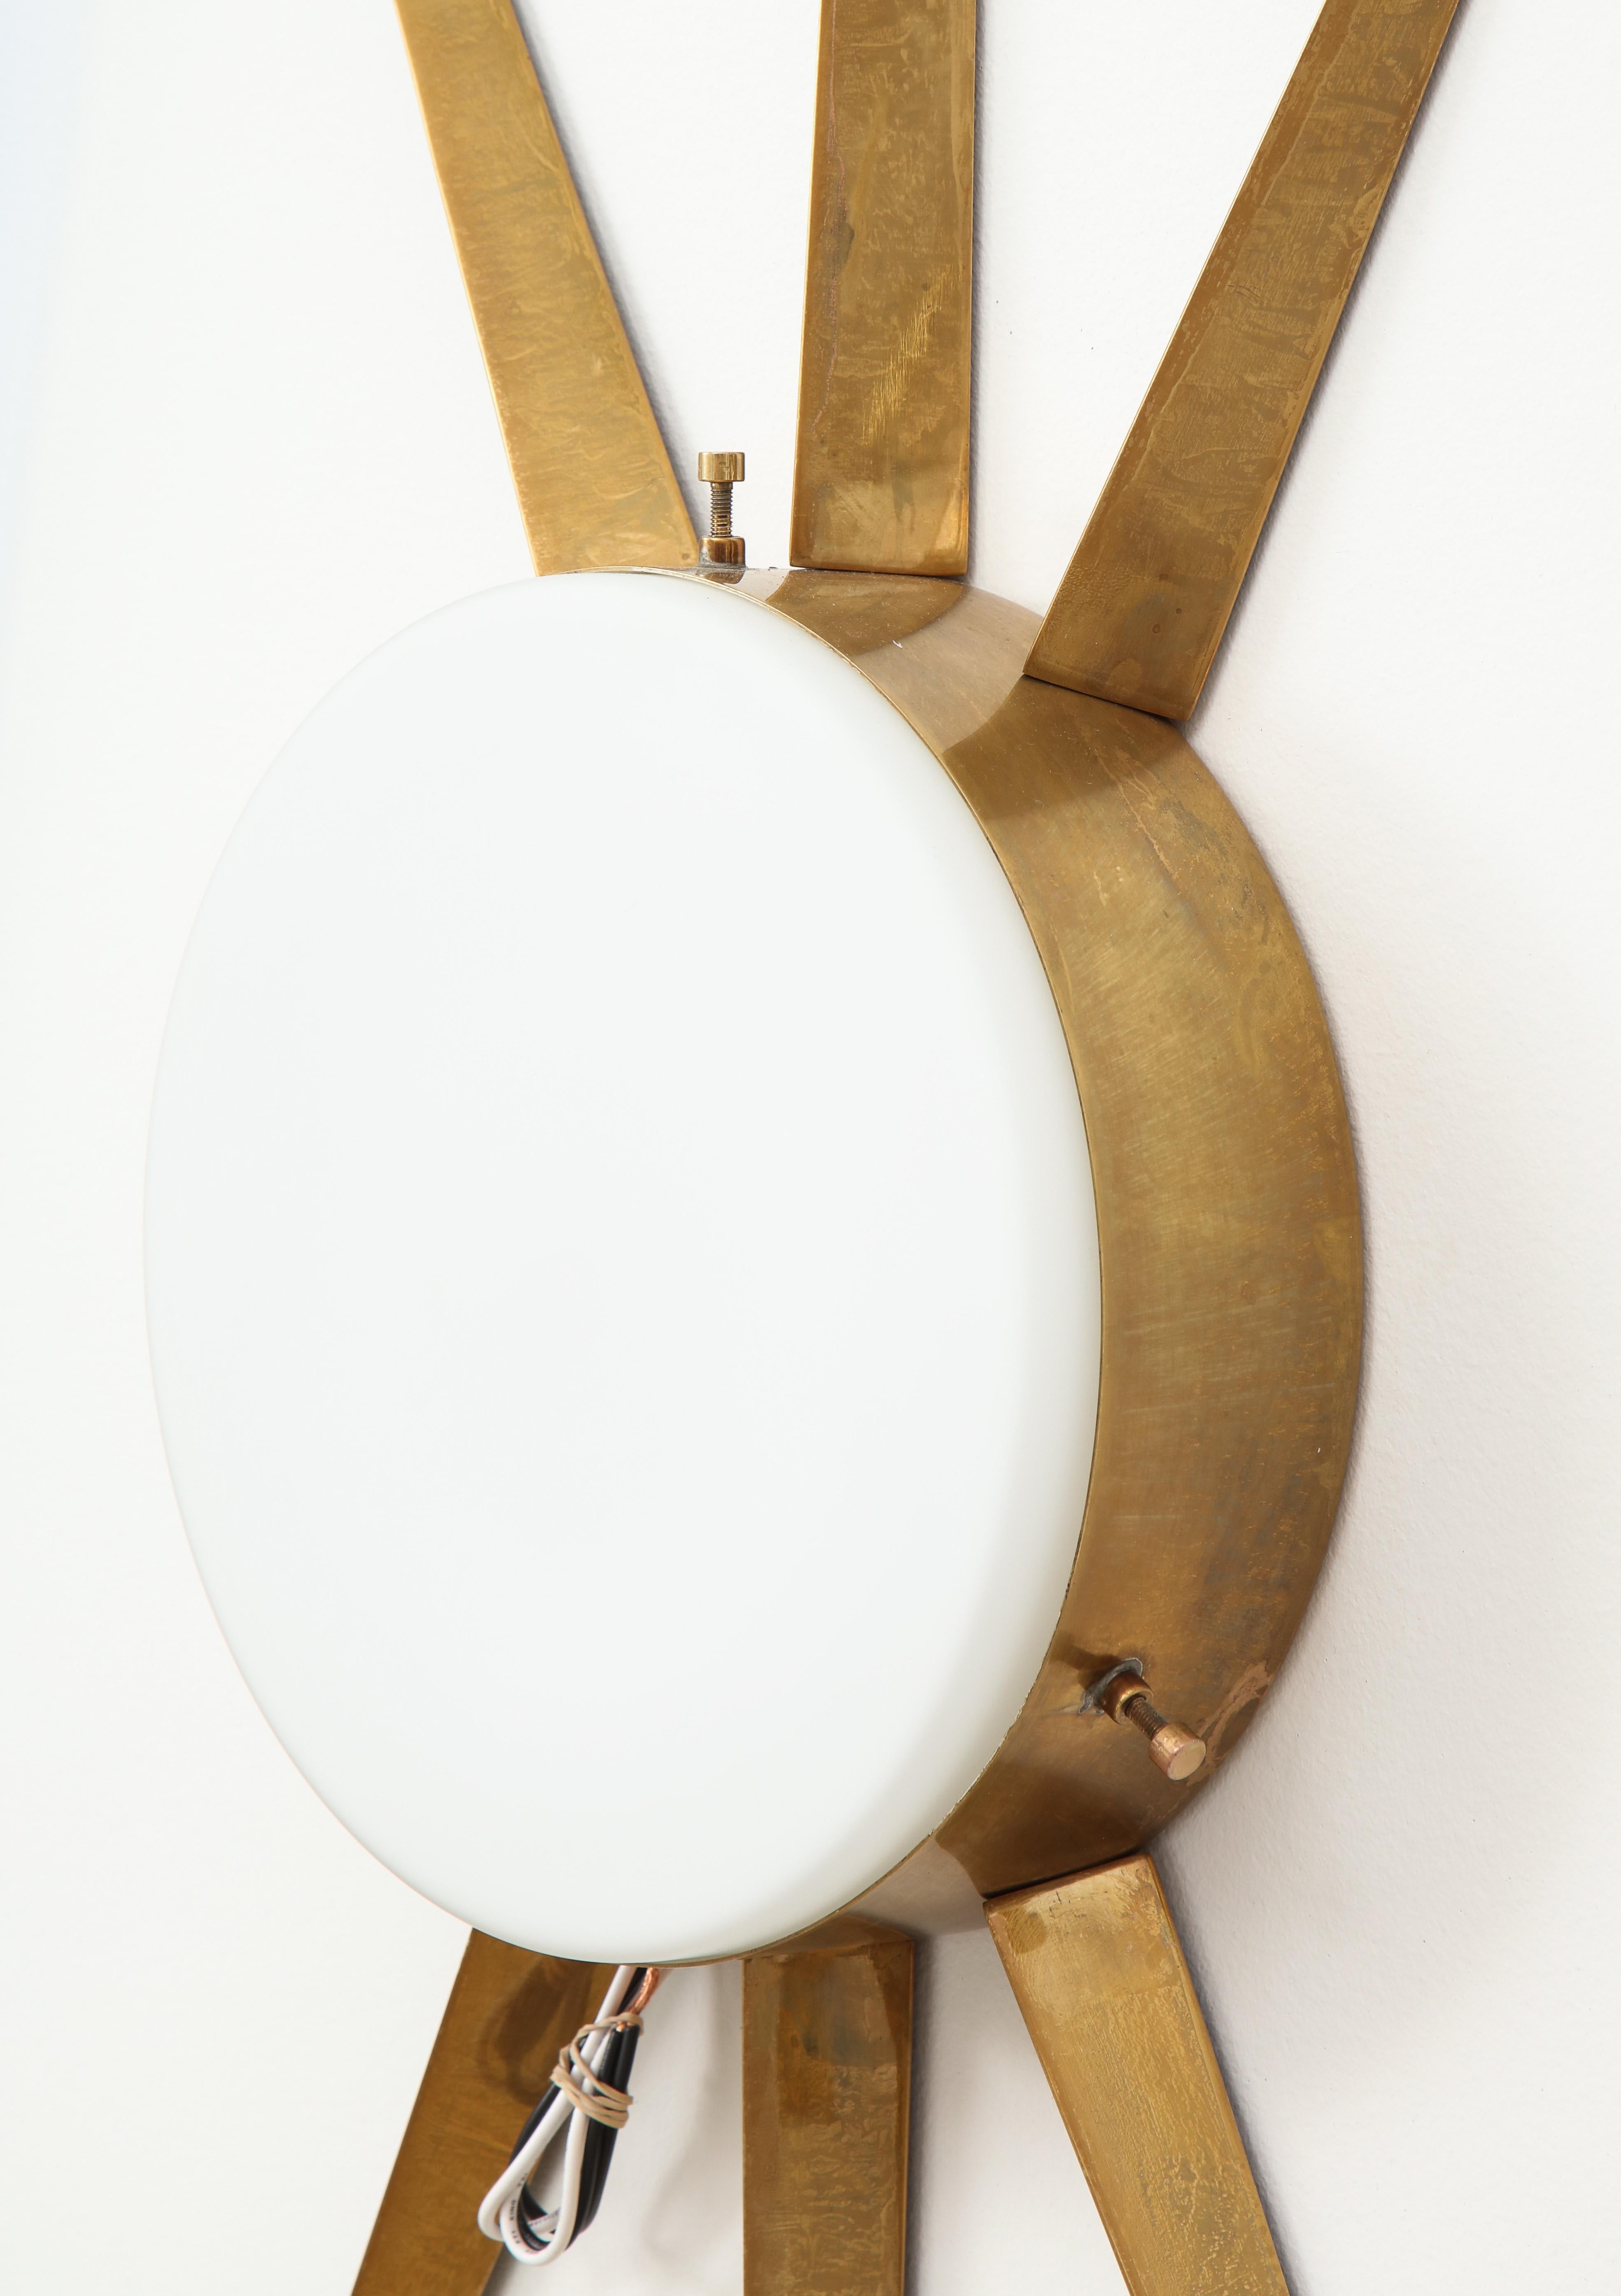 Gio Ponti for Arredoluce rare large pair of sconces or ceiling lights with radiating brass structures and frosted glass shades. 
This model was recently confirmed to have been a Gio Ponti design through Gio Ponti archives by Wright auction house